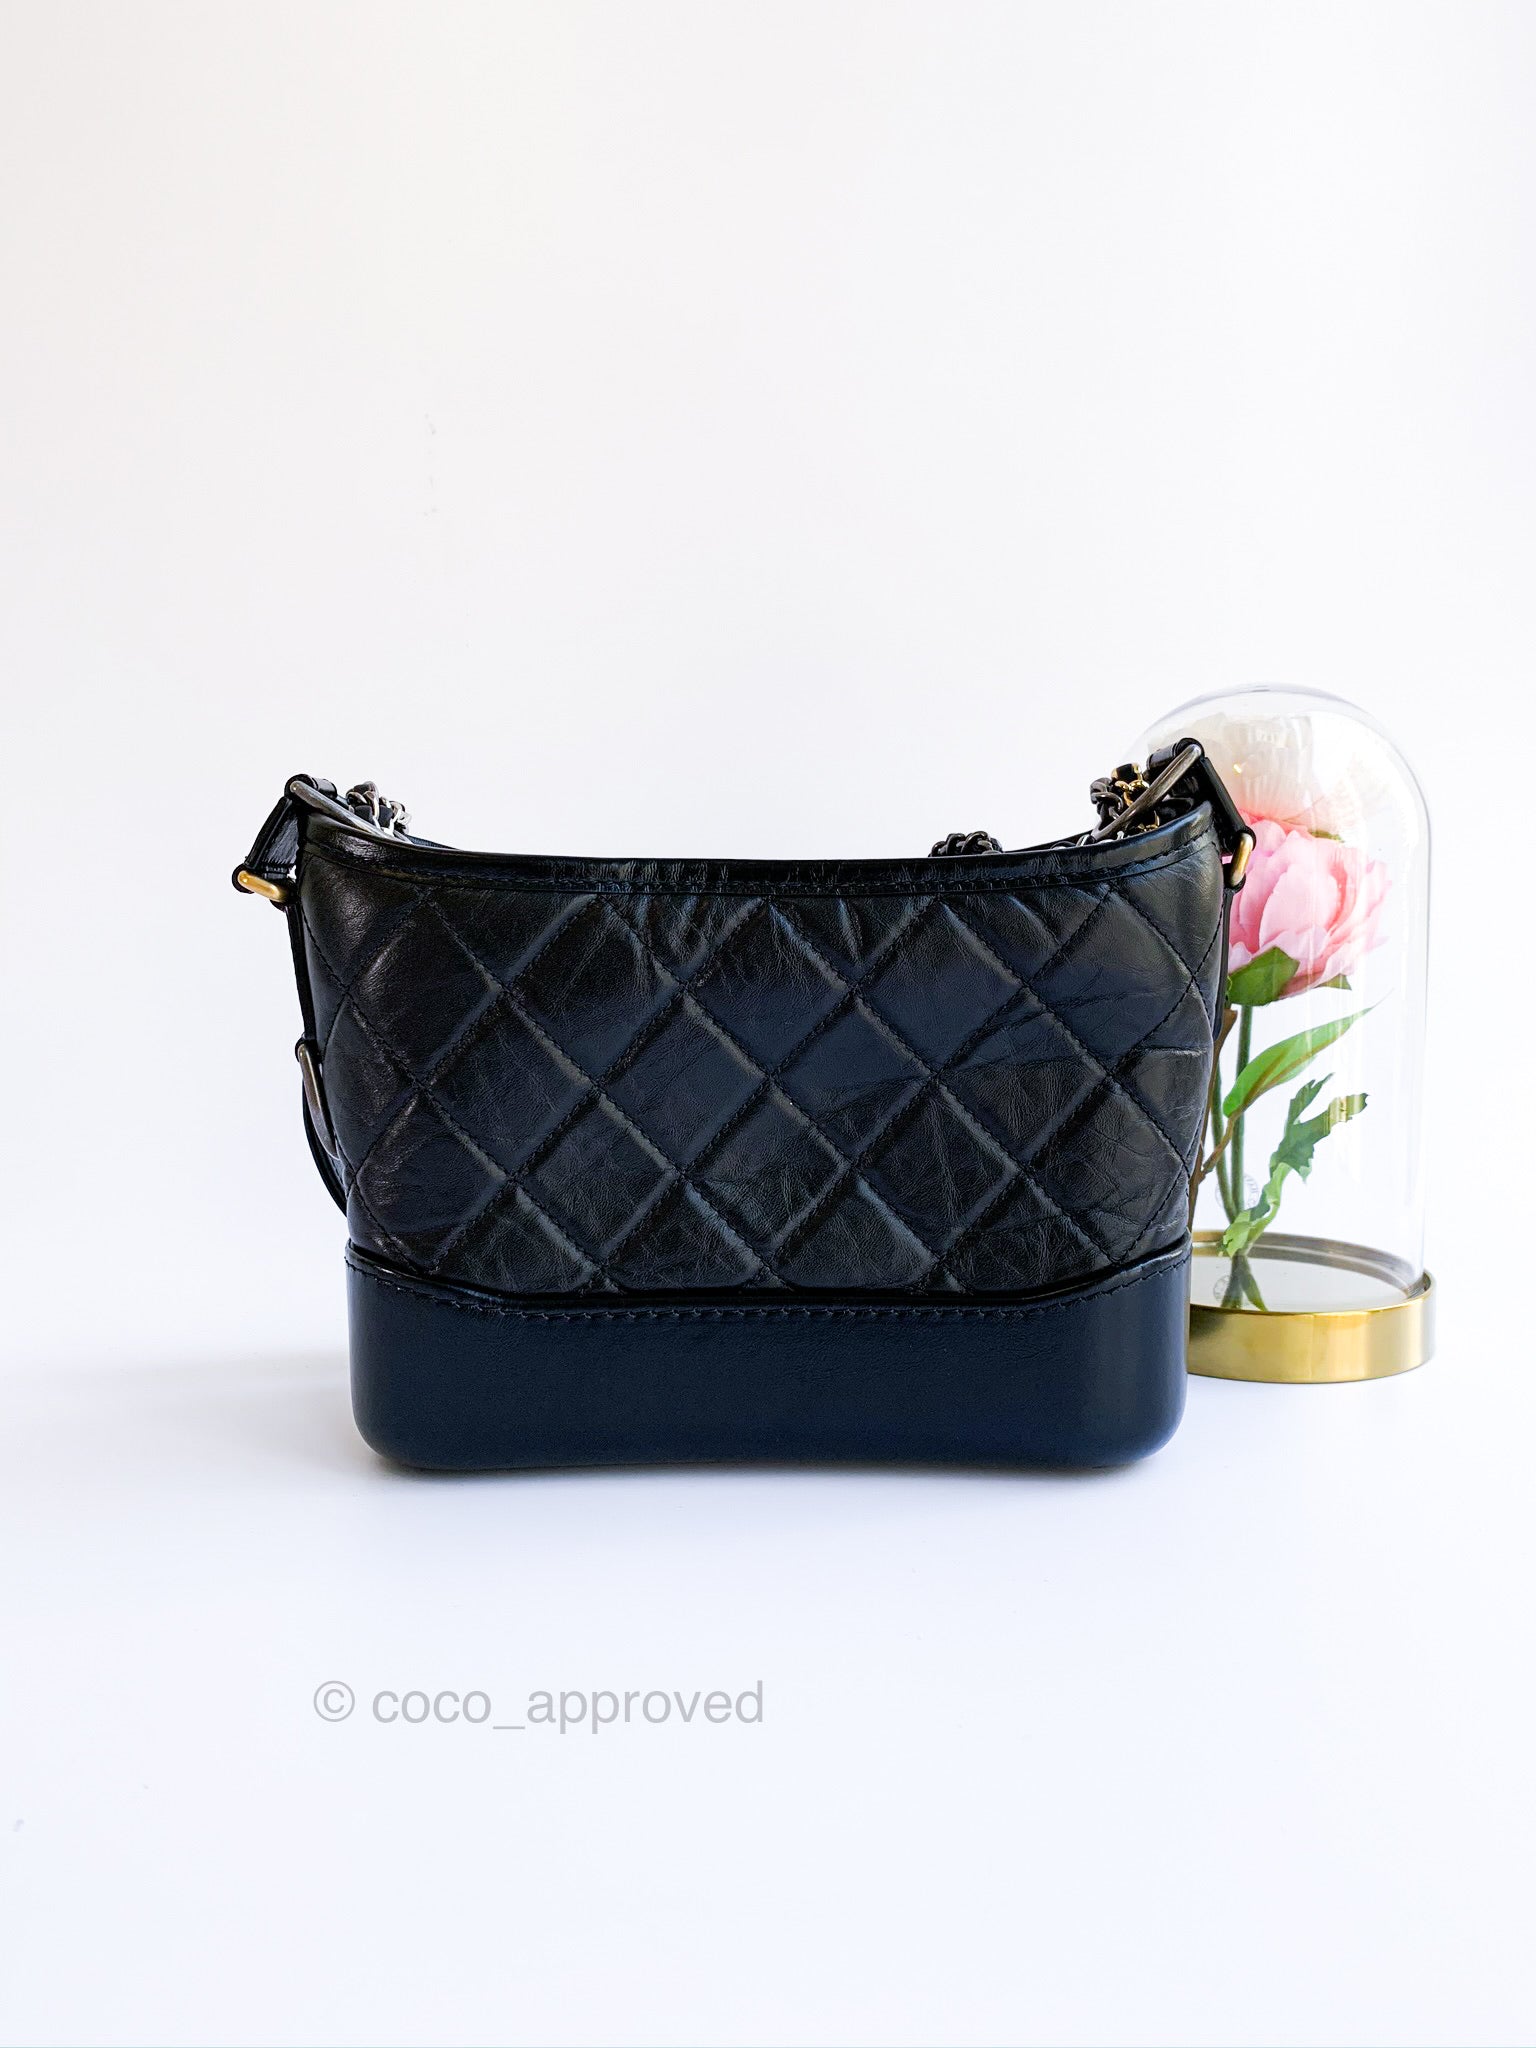 Chanel Gabrielle Hobo Bag Diamond Gabrielle Quilted Aged/Smooth Small Black